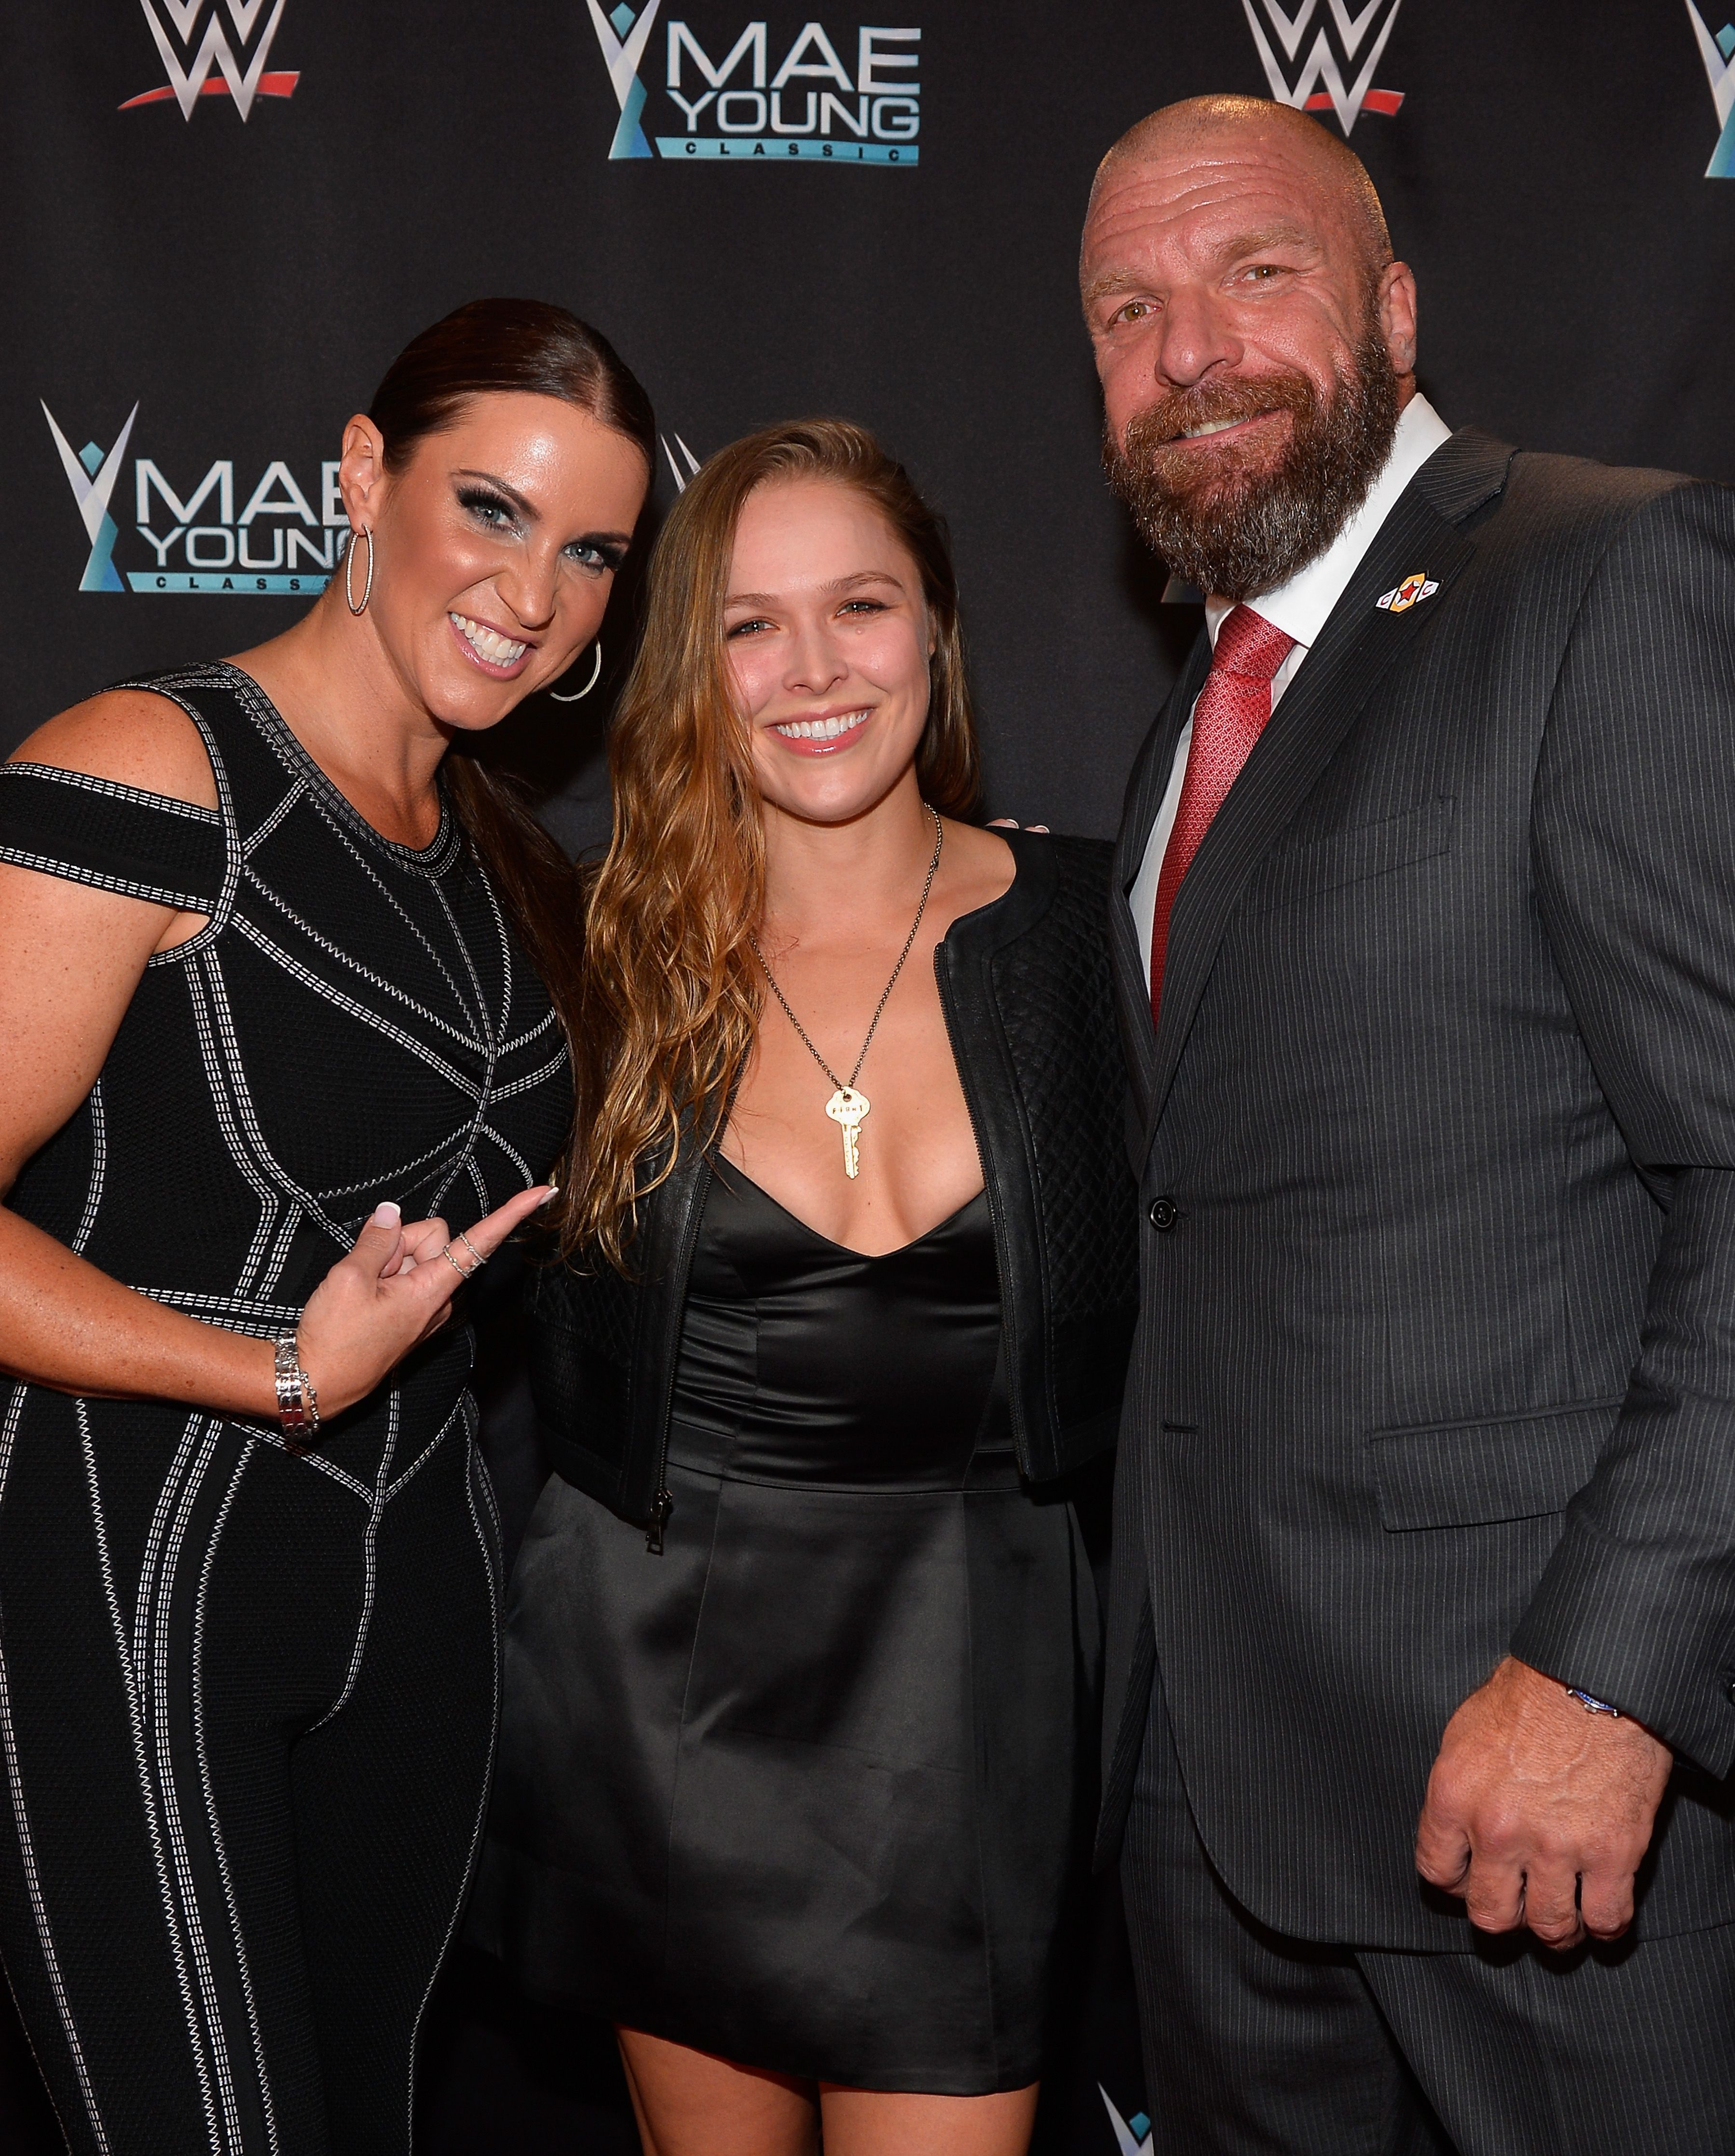 Triple H teases Ronda Rousey WWE comeback image picture pic